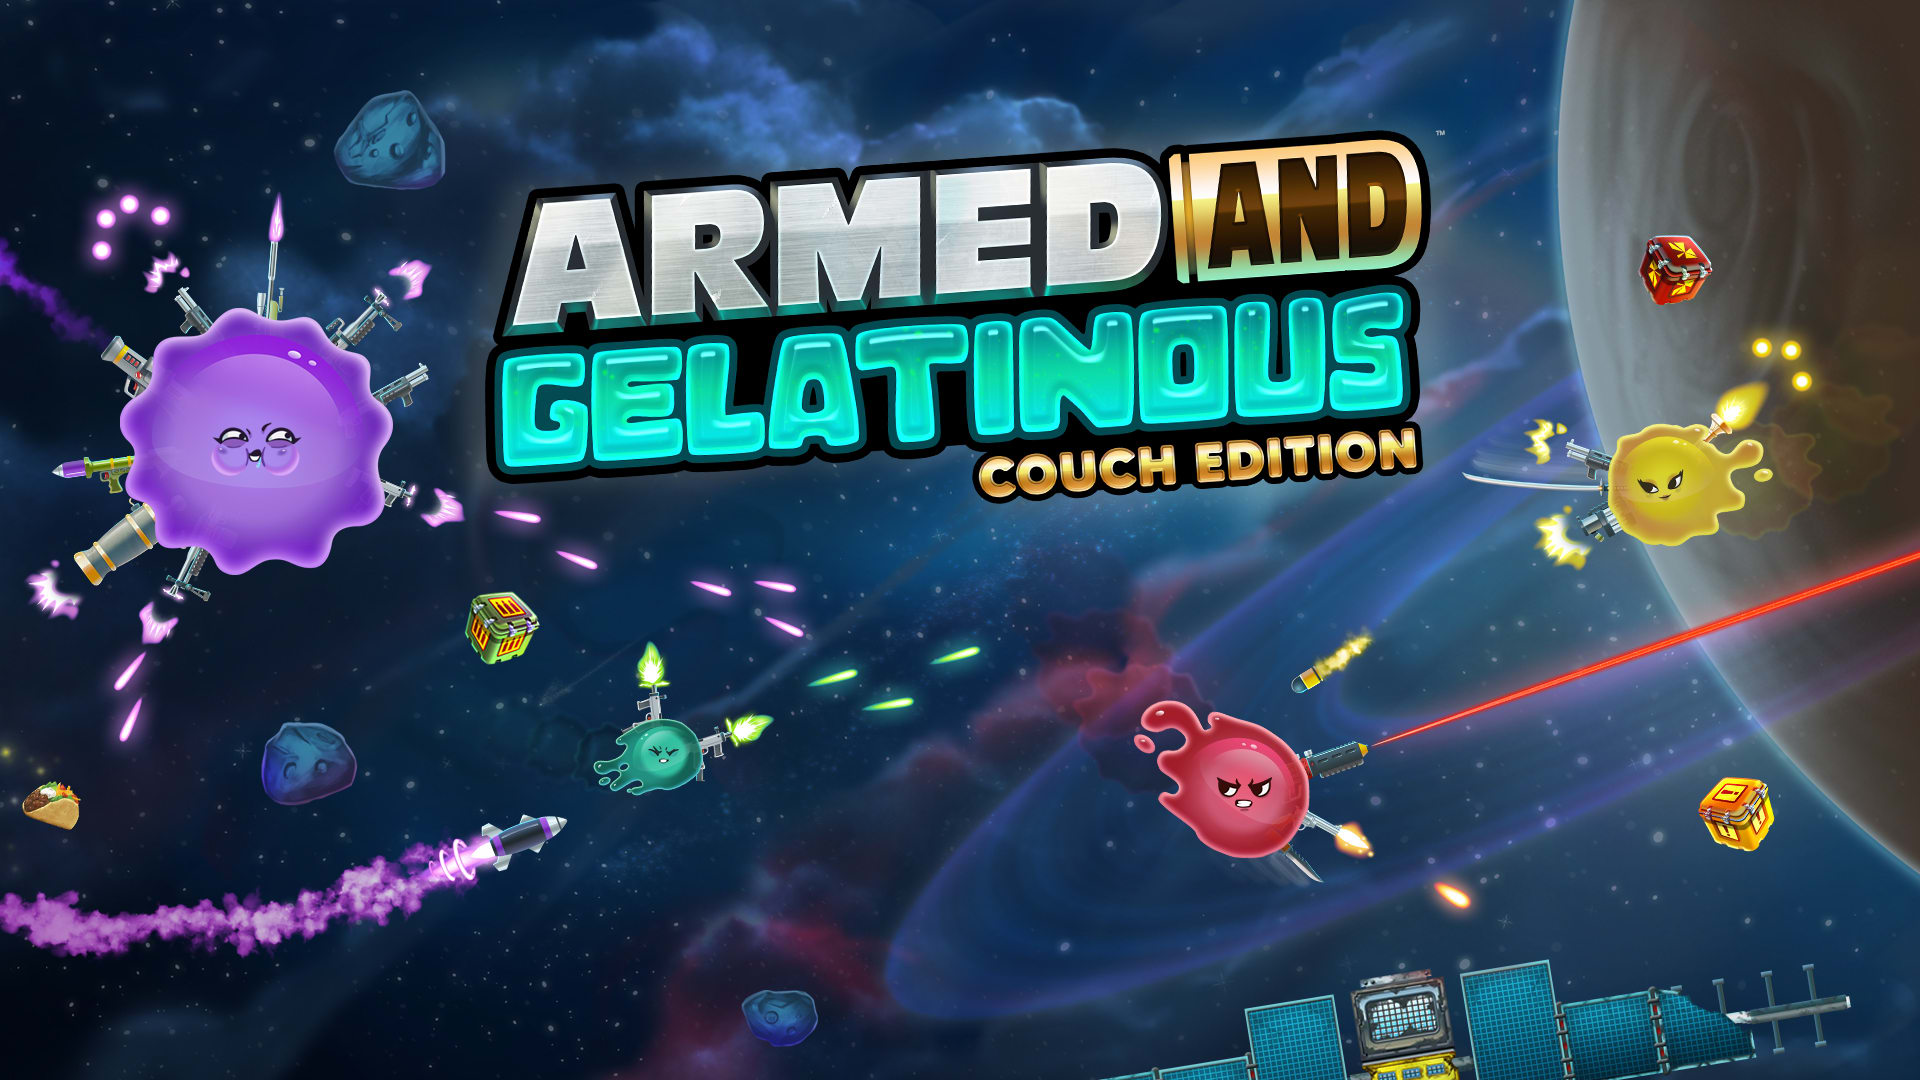 Armed and Gelatinous: Couch Edition 1